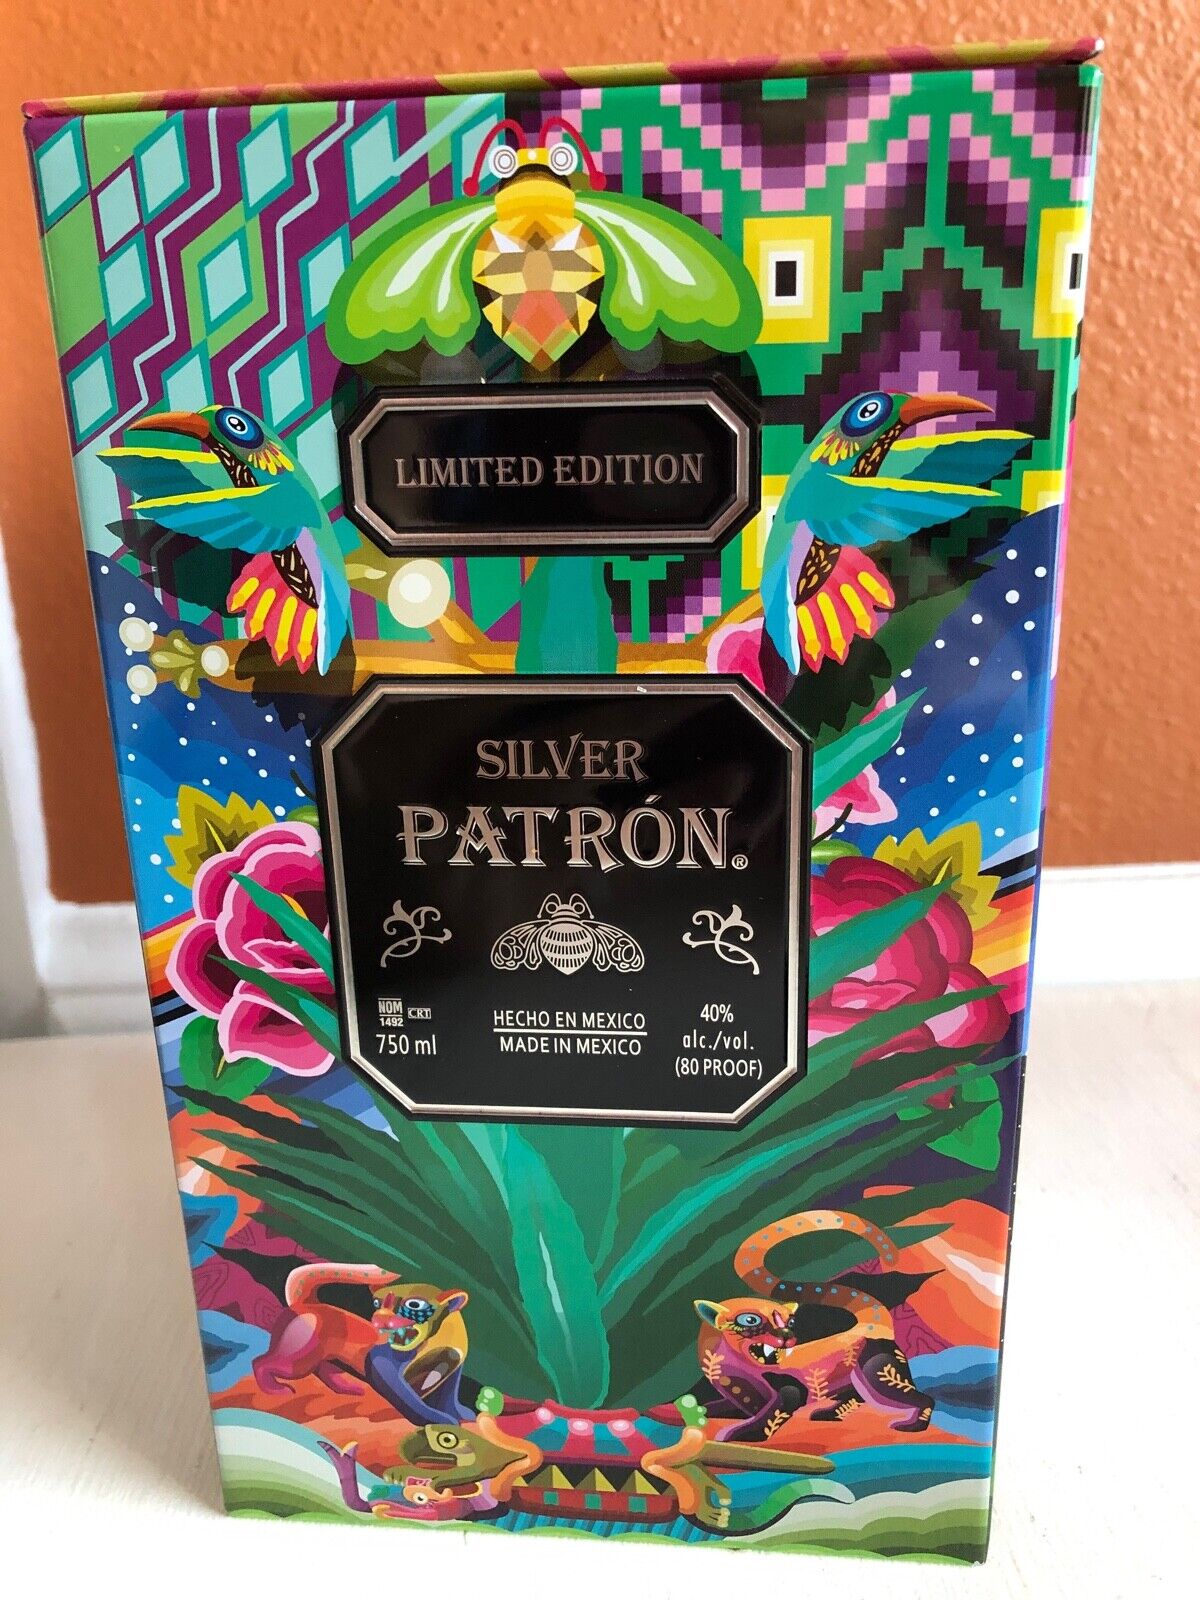 Silver Patron Limited Edition Metal Mexican Heritage Tin, Empty, No Bottle